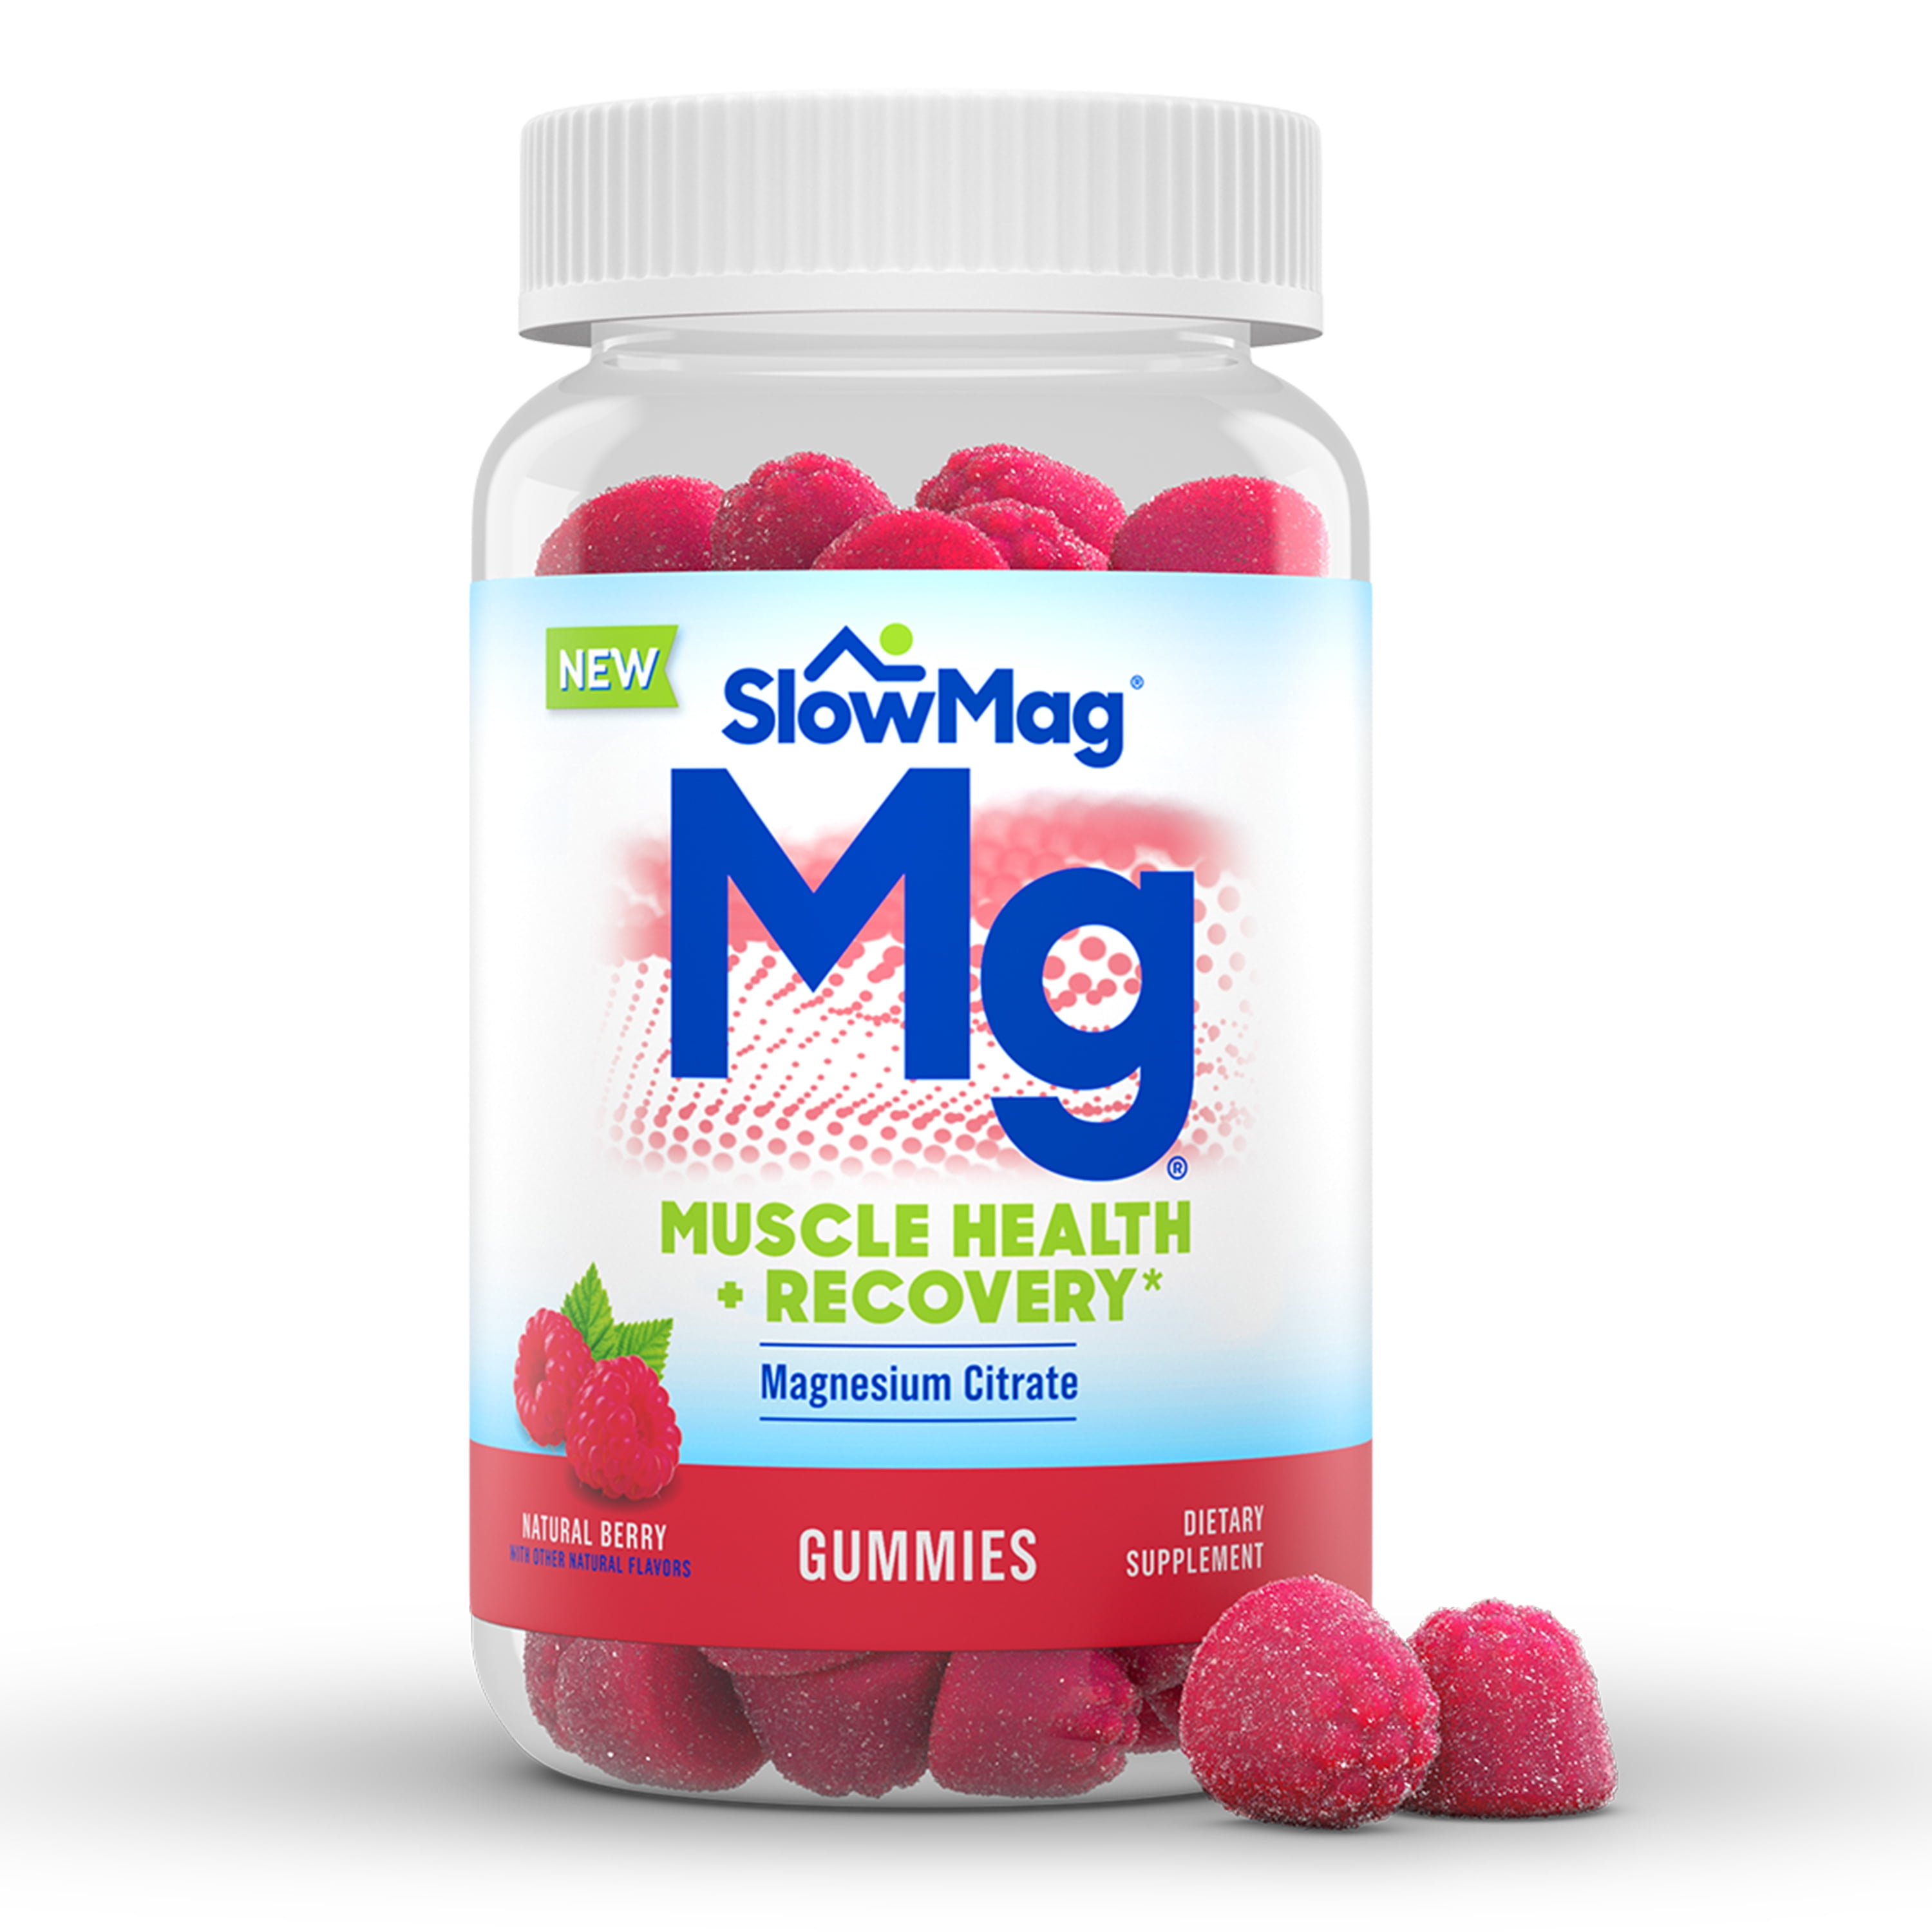 SlowMag Mg Muscle Health + Recovery* Magnesium Citrate Supplement Gummies, Berry, 60 Ct